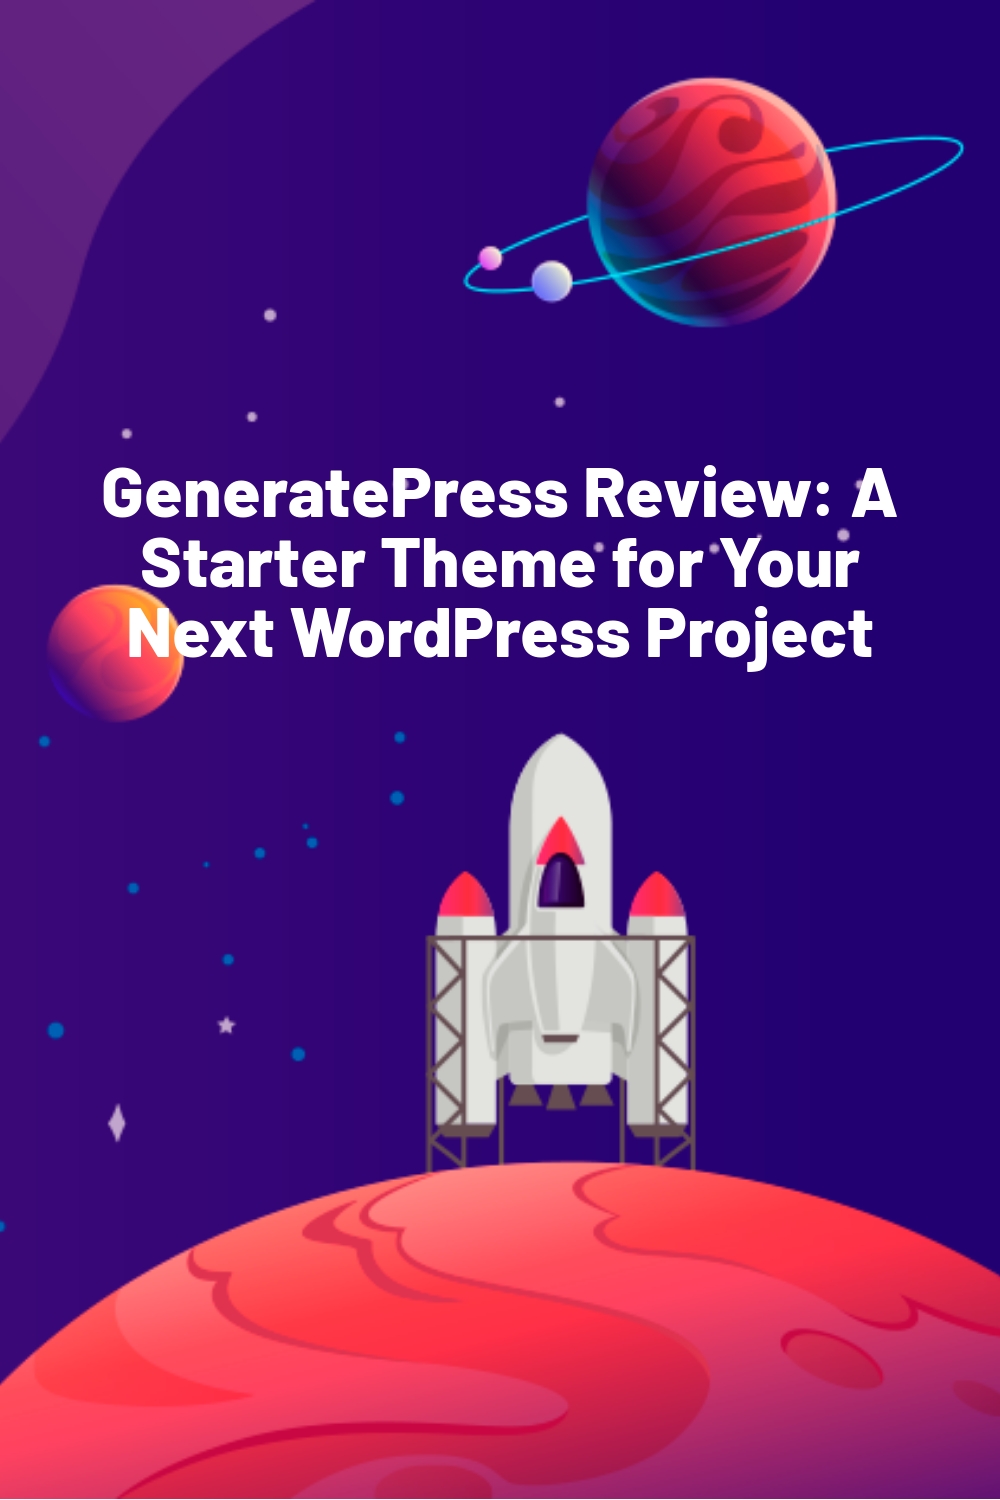 GeneratePress Review: A Starter Theme for Your Next WordPress Project